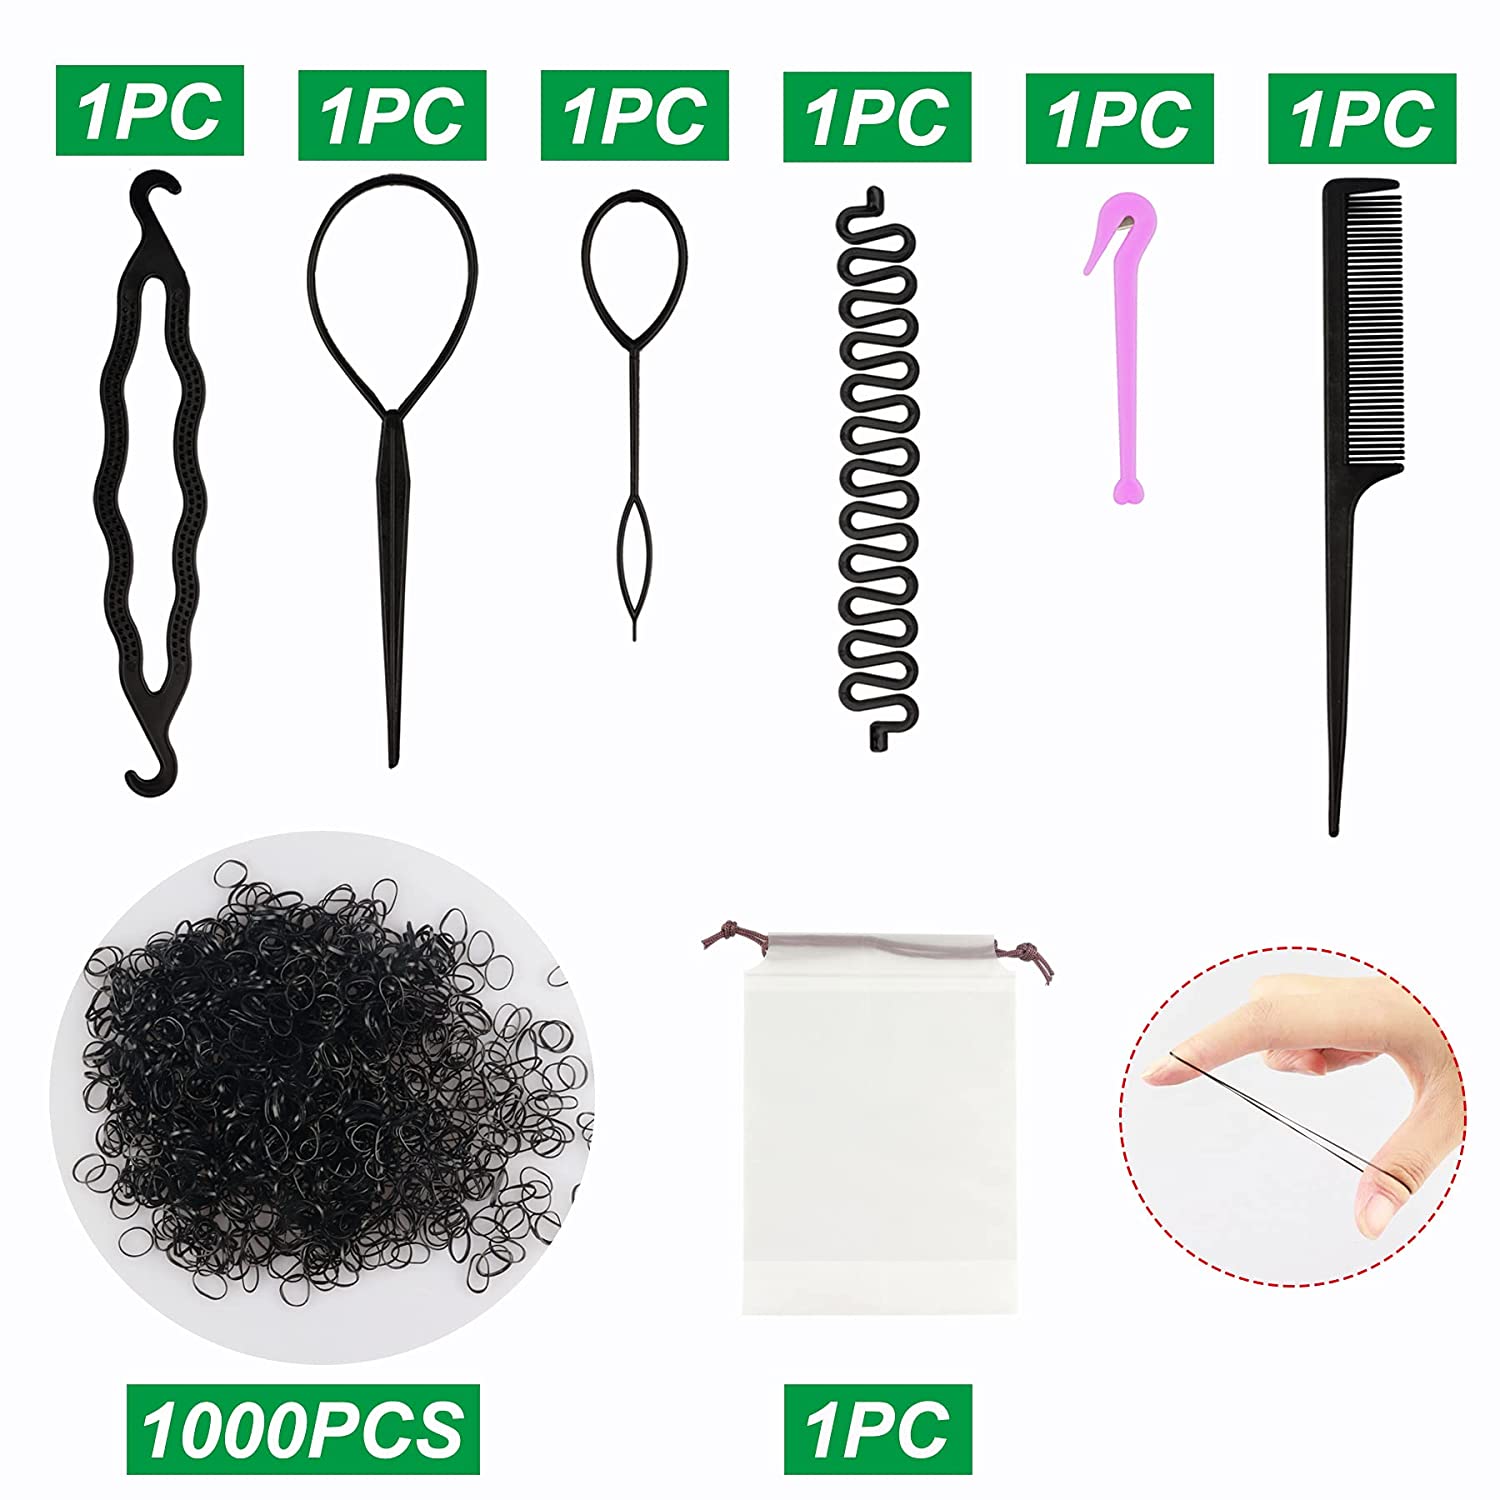 Juome 1011Pcs Hair Styling Tools, 2Pcs Rubber Band Cutter for Hair, 2Pcs  Topsy Tail Hair Tool, 1000pcs Black Rubber Bands for Hair, 7Pcs Hair  Braiding